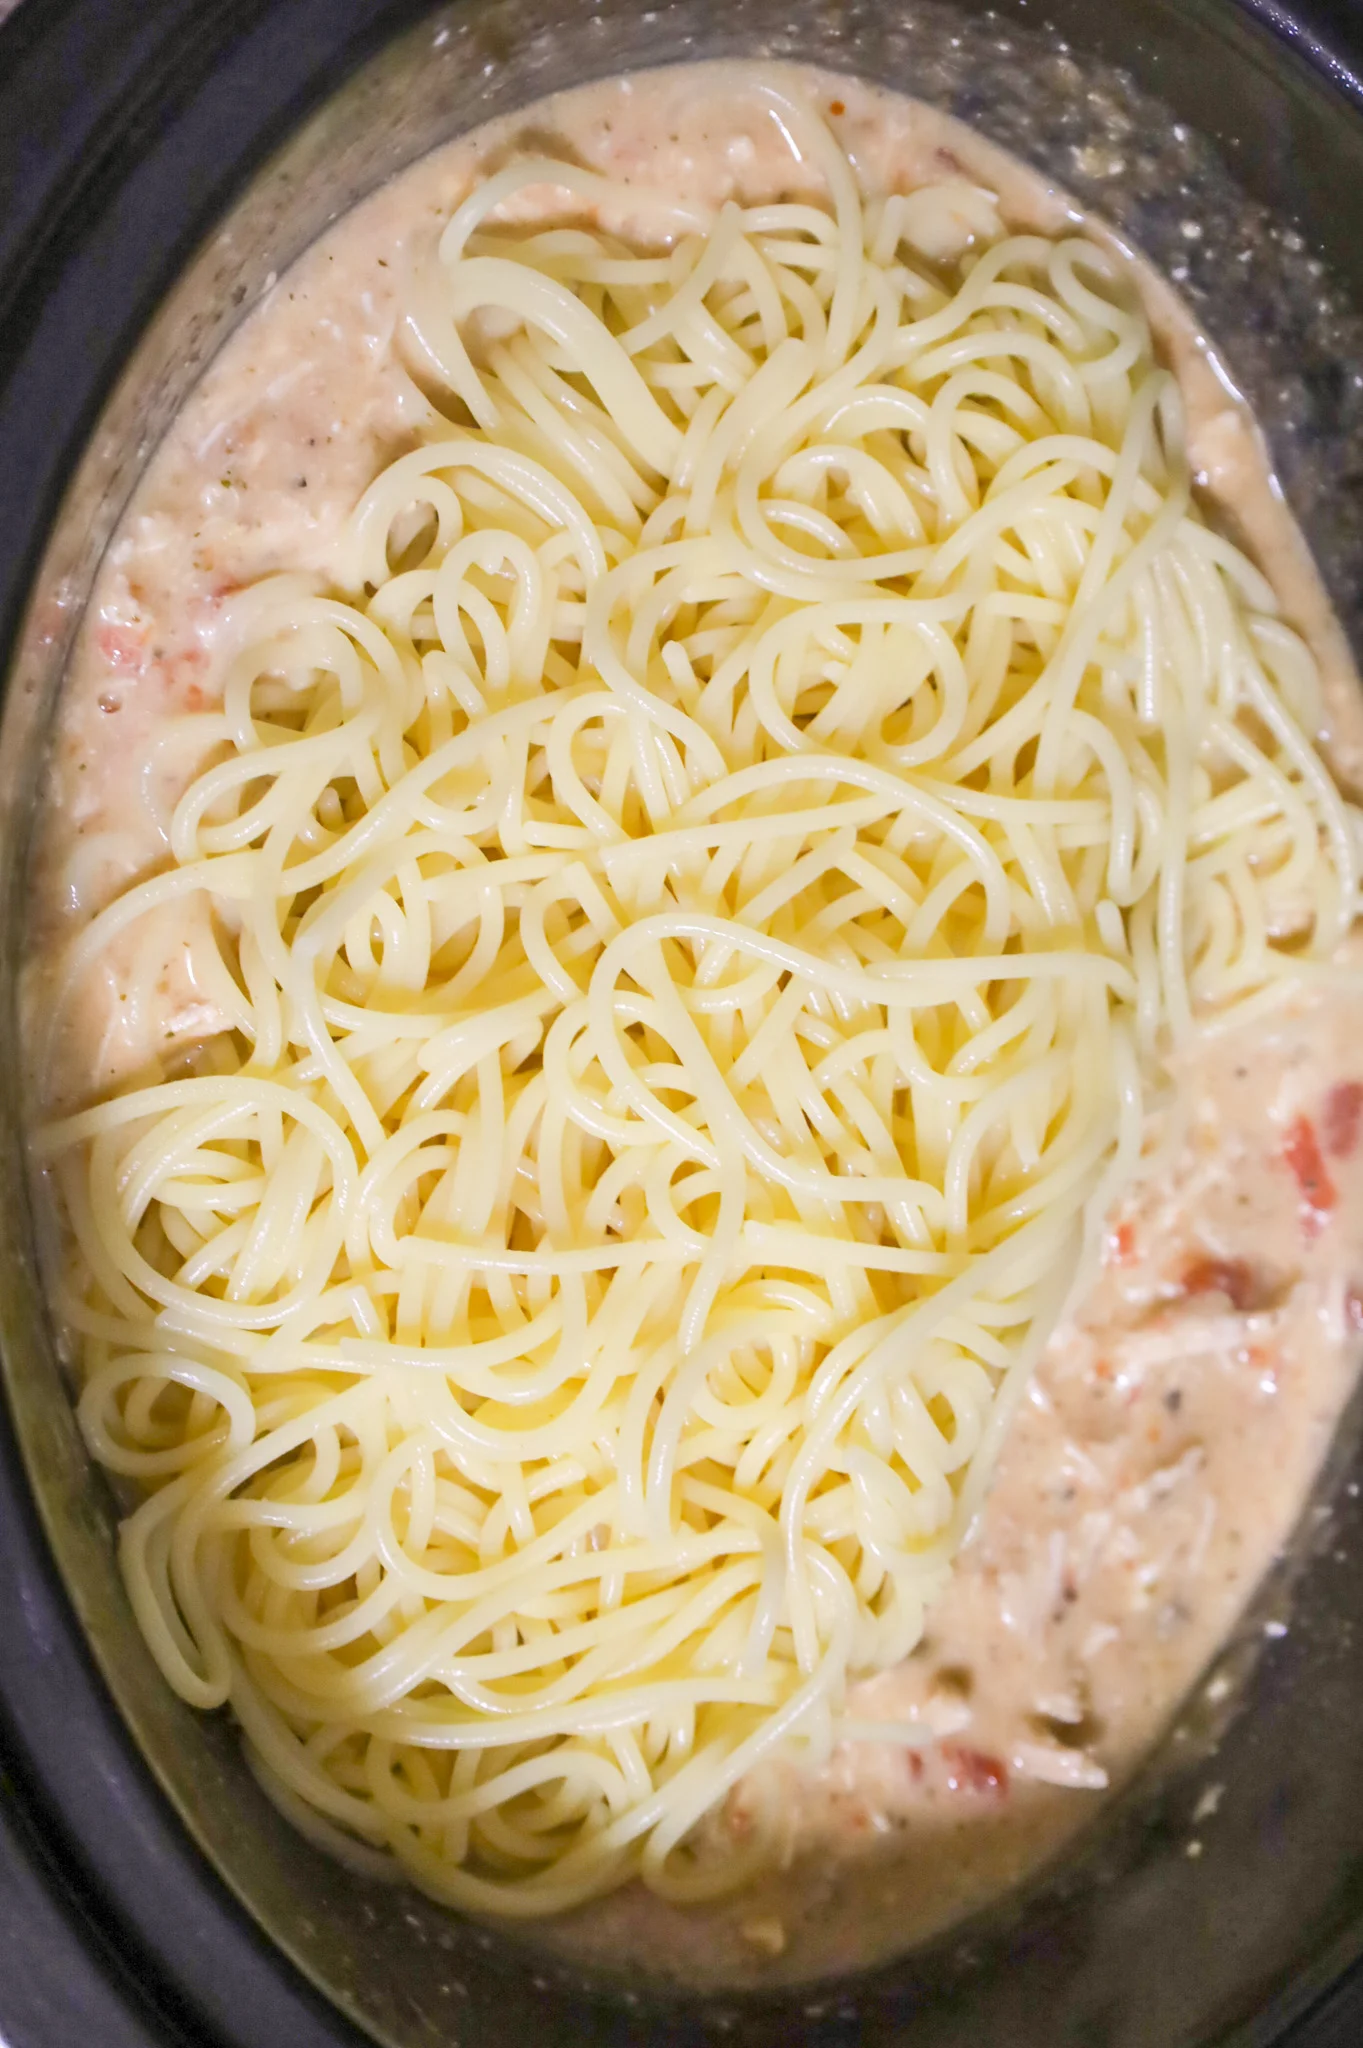 cooked spaghetti on top of cream soup mixture in a crock pot